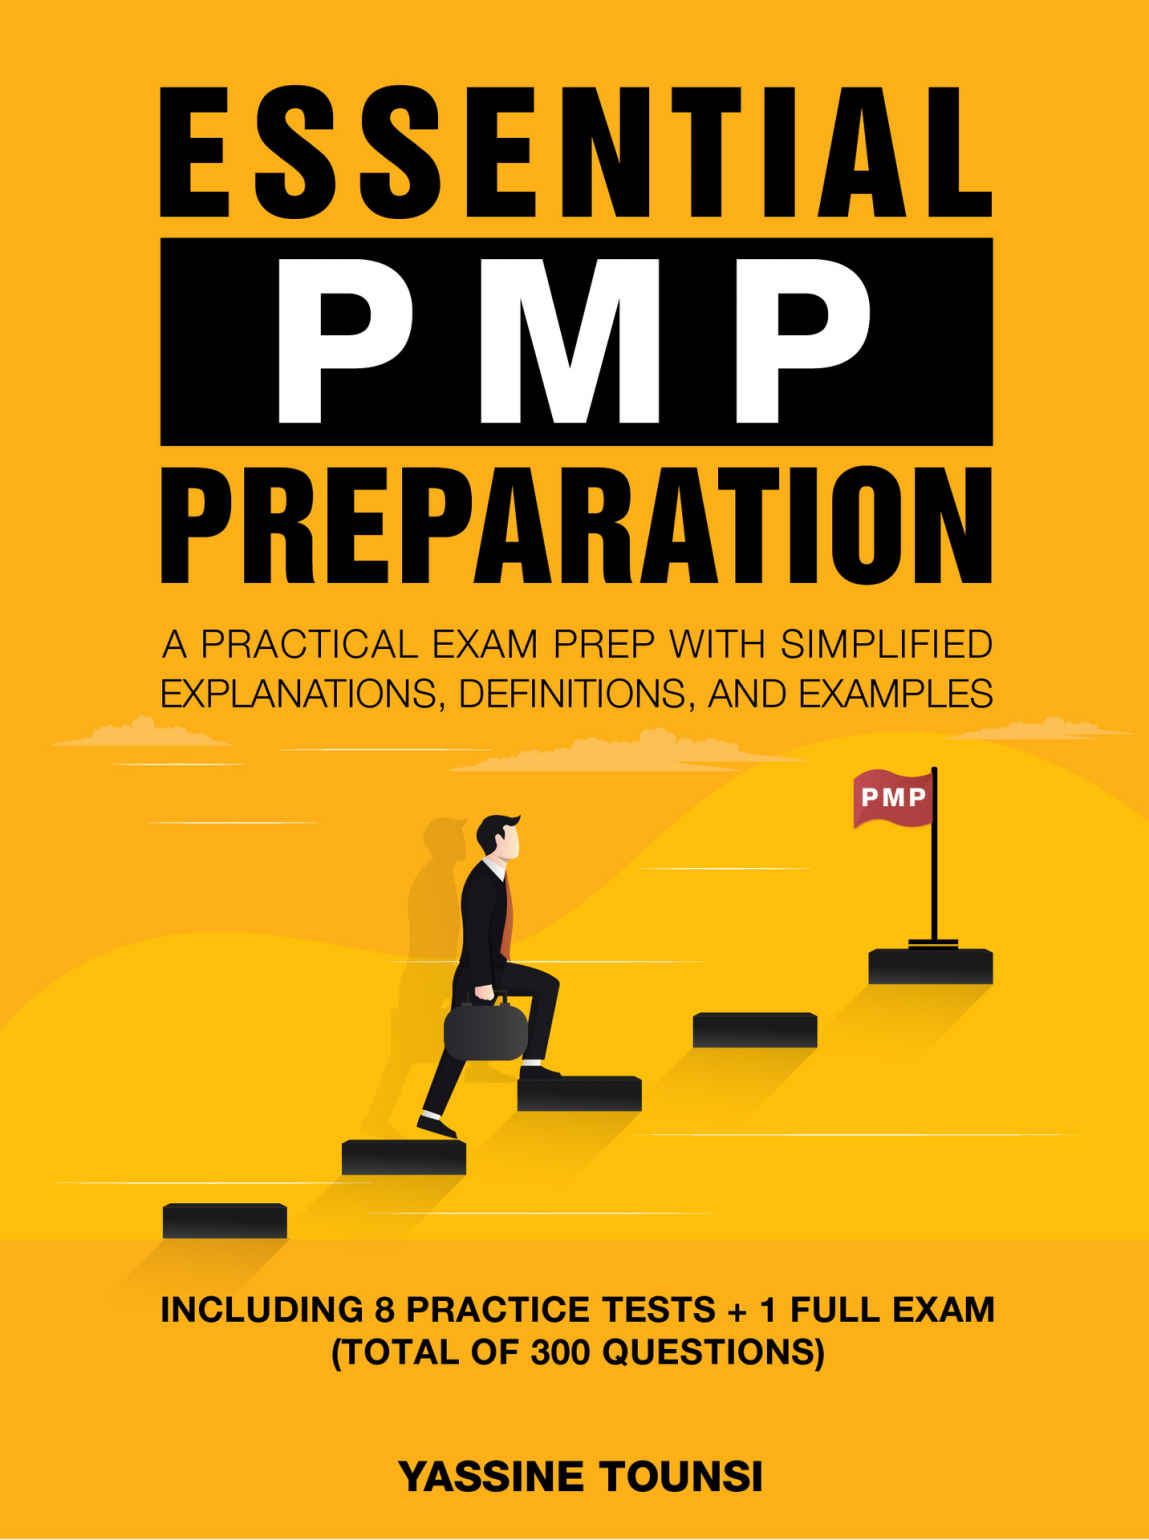 Essential PMP® Preparation: A Practical Exam Prep with Simplified explanations, definitions, and examples - Aligned with PMBOK® 7th Edition and the Agile Practice Guide